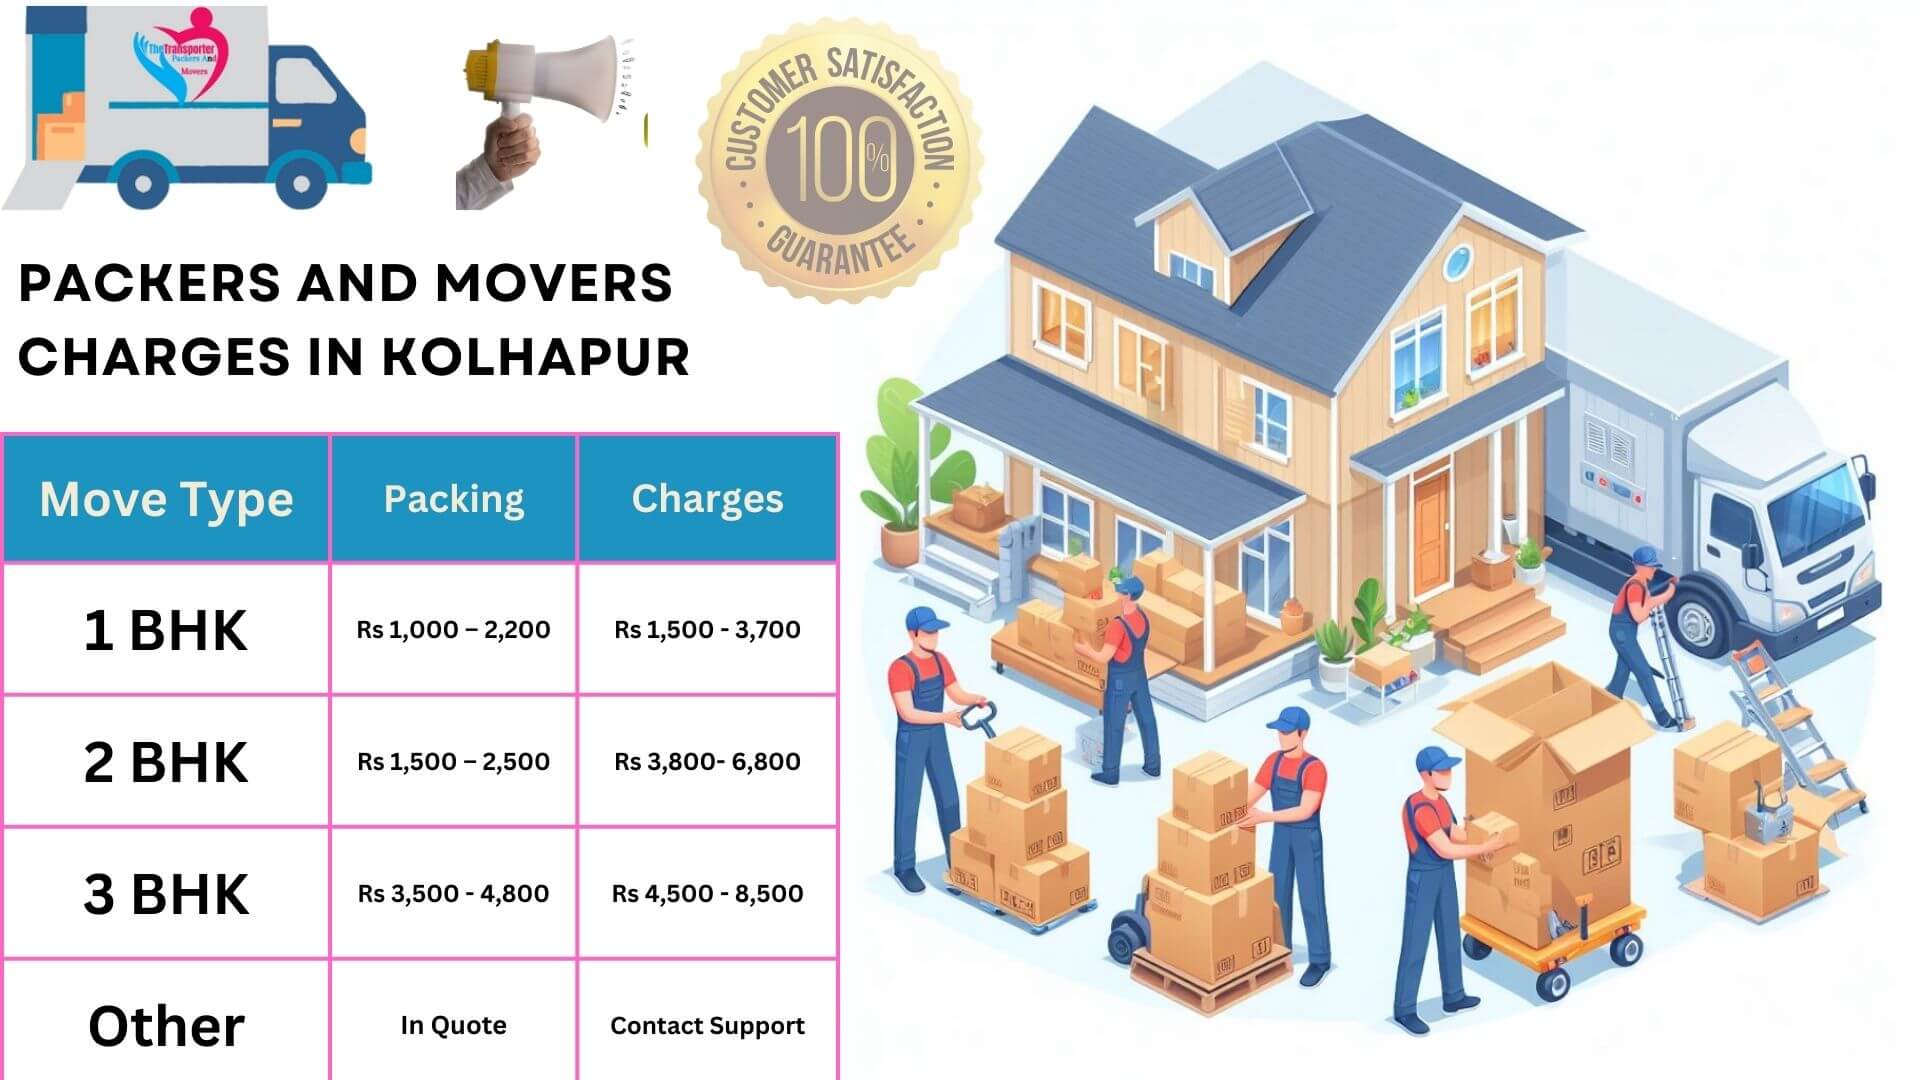 TheTransporter Packers and movers Charges list in Kolhapur 